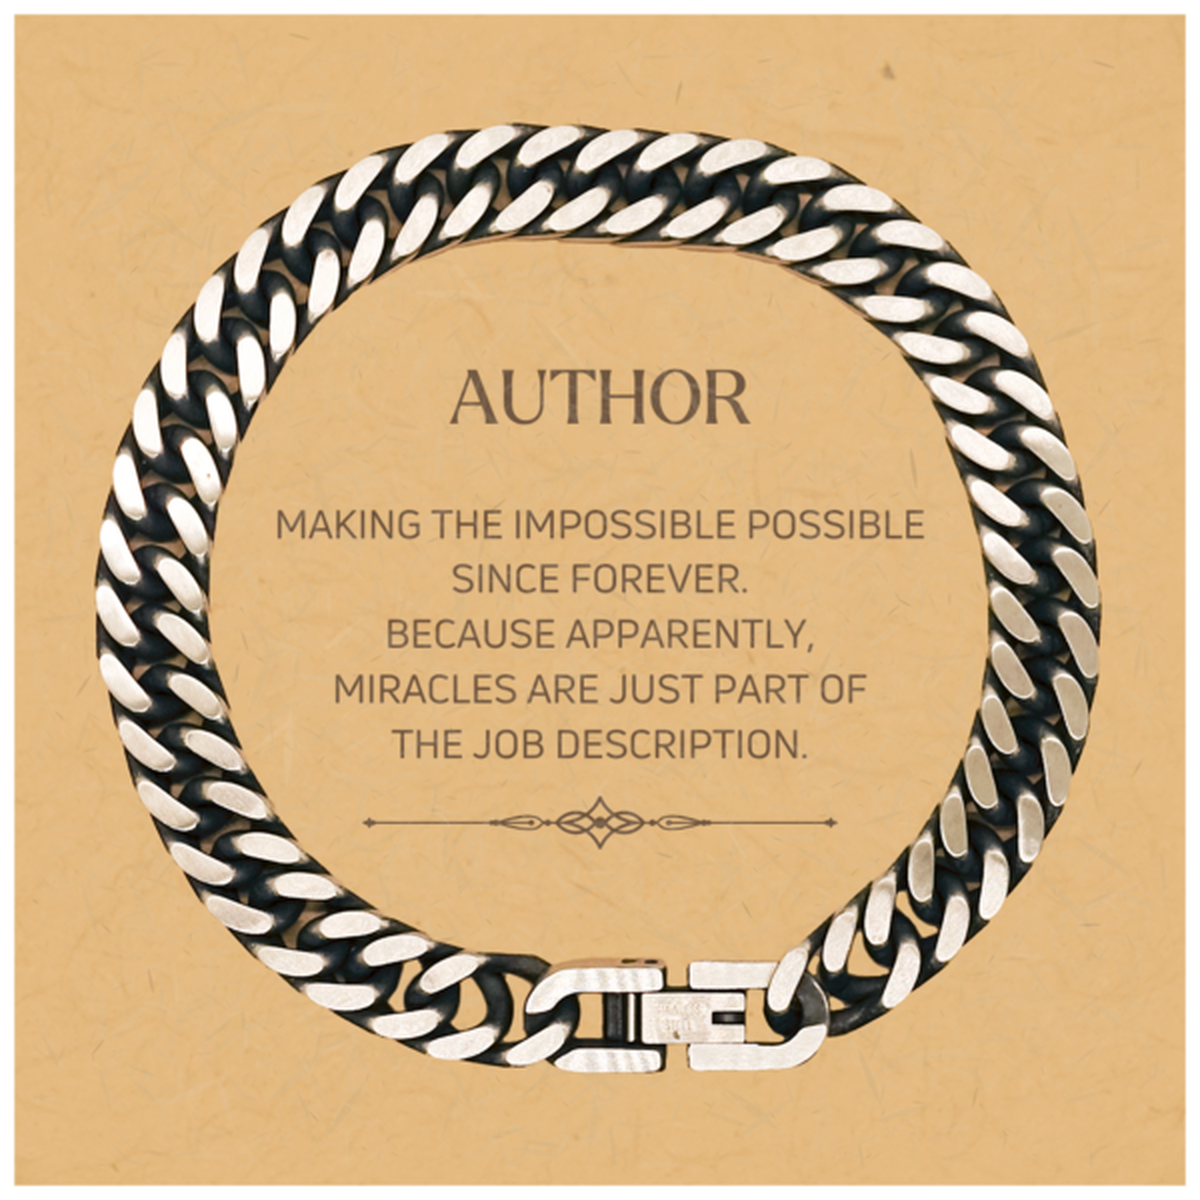 Funny Author Gifts, Miracles are just part of the job description, Inspirational Birthday Christmas Cuban Link Chain Bracelet For Author, Men, Women, Coworkers, Friends, Boss